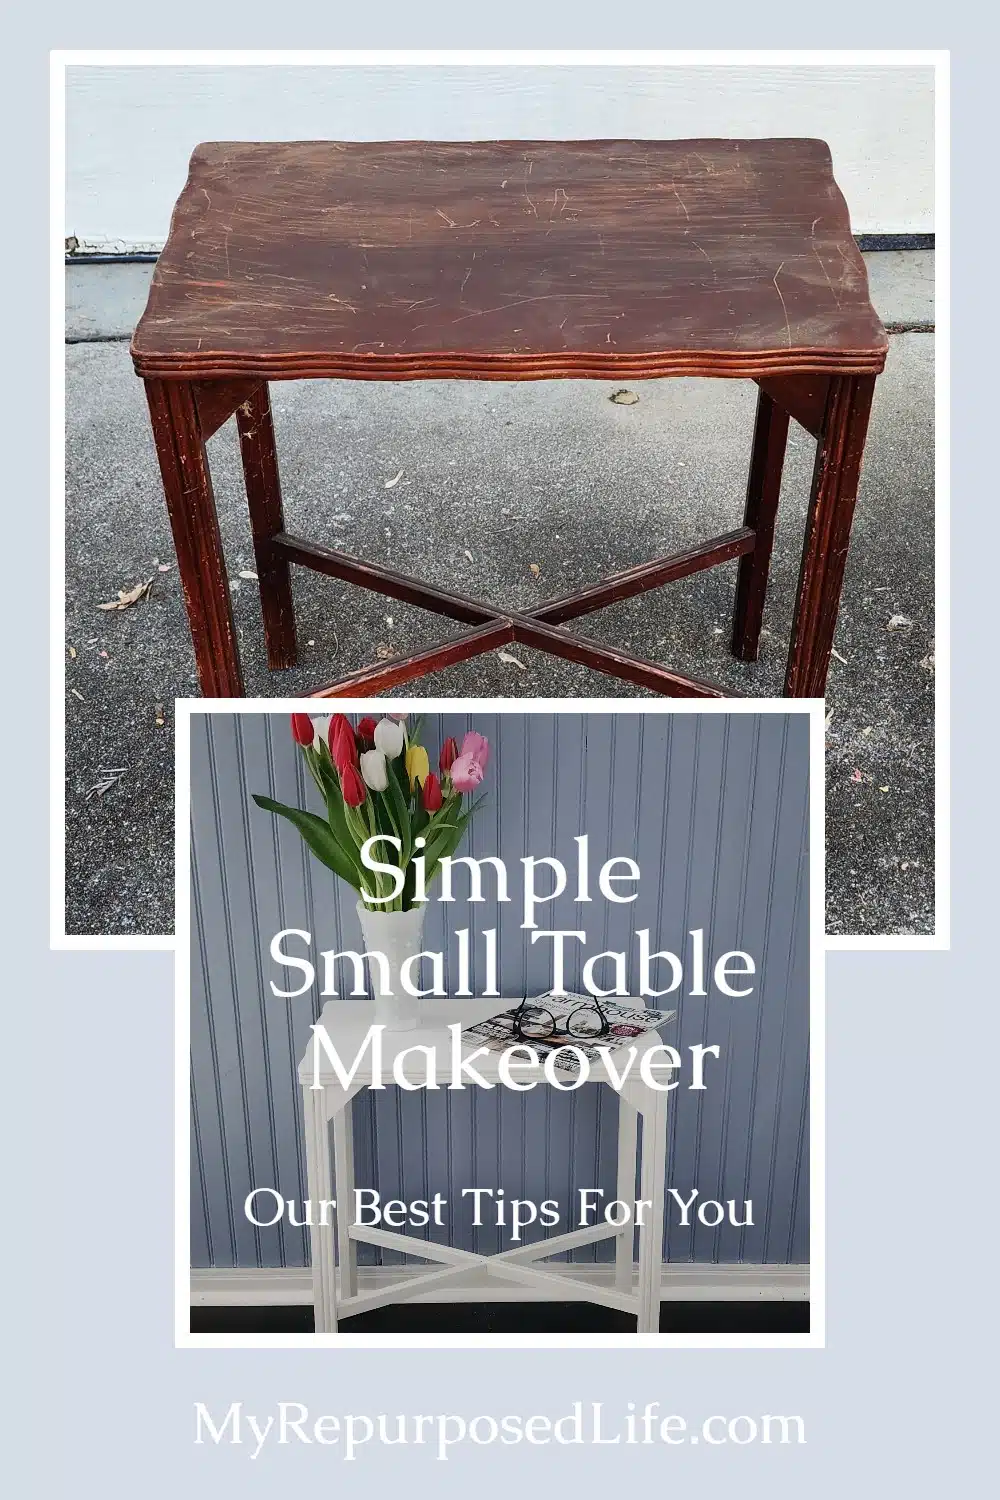 Upgrade your home decor with DIY small table makeover ideas. Budget-friendly tips & step-by-step tutorials for simple transformations. via @repurposedlife